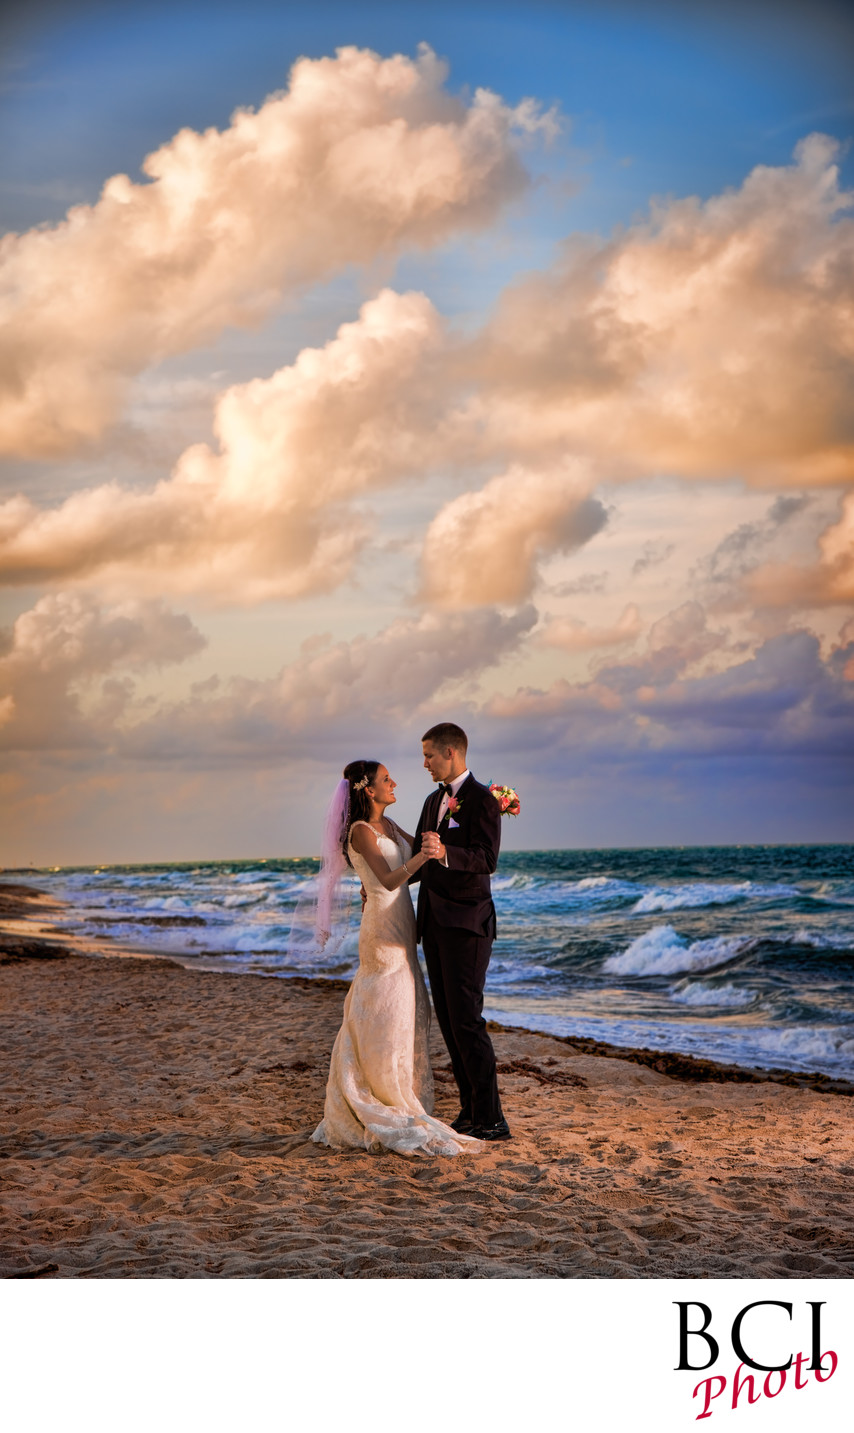 Finest Wedding photography in the area